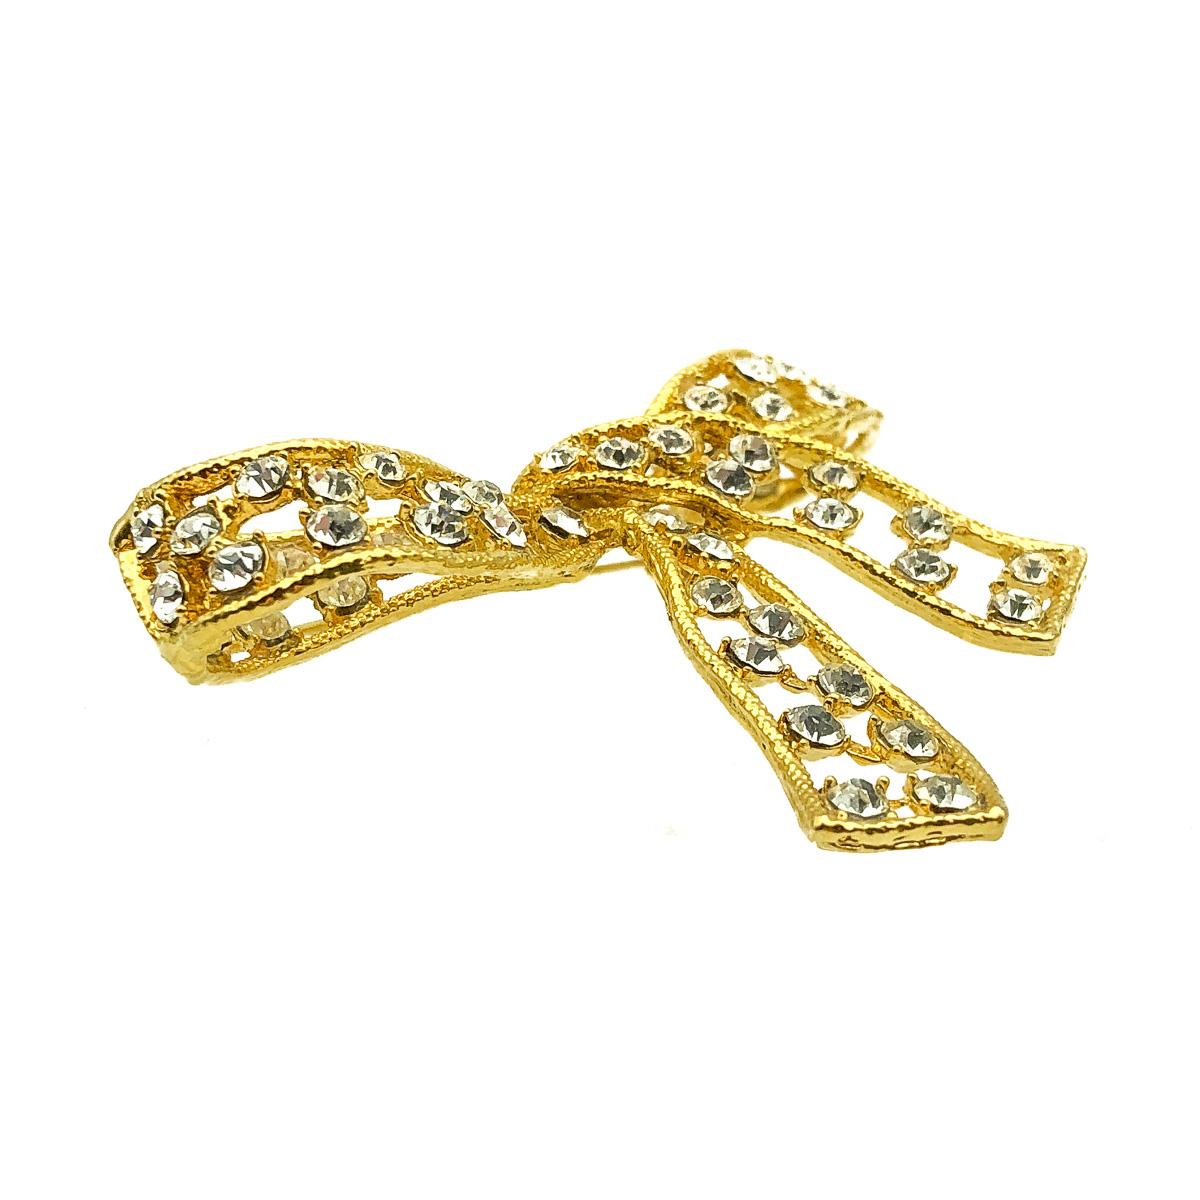 Vintage Crystal Bow Brooch 1970s In Good Condition For Sale In Wilmslow, GB